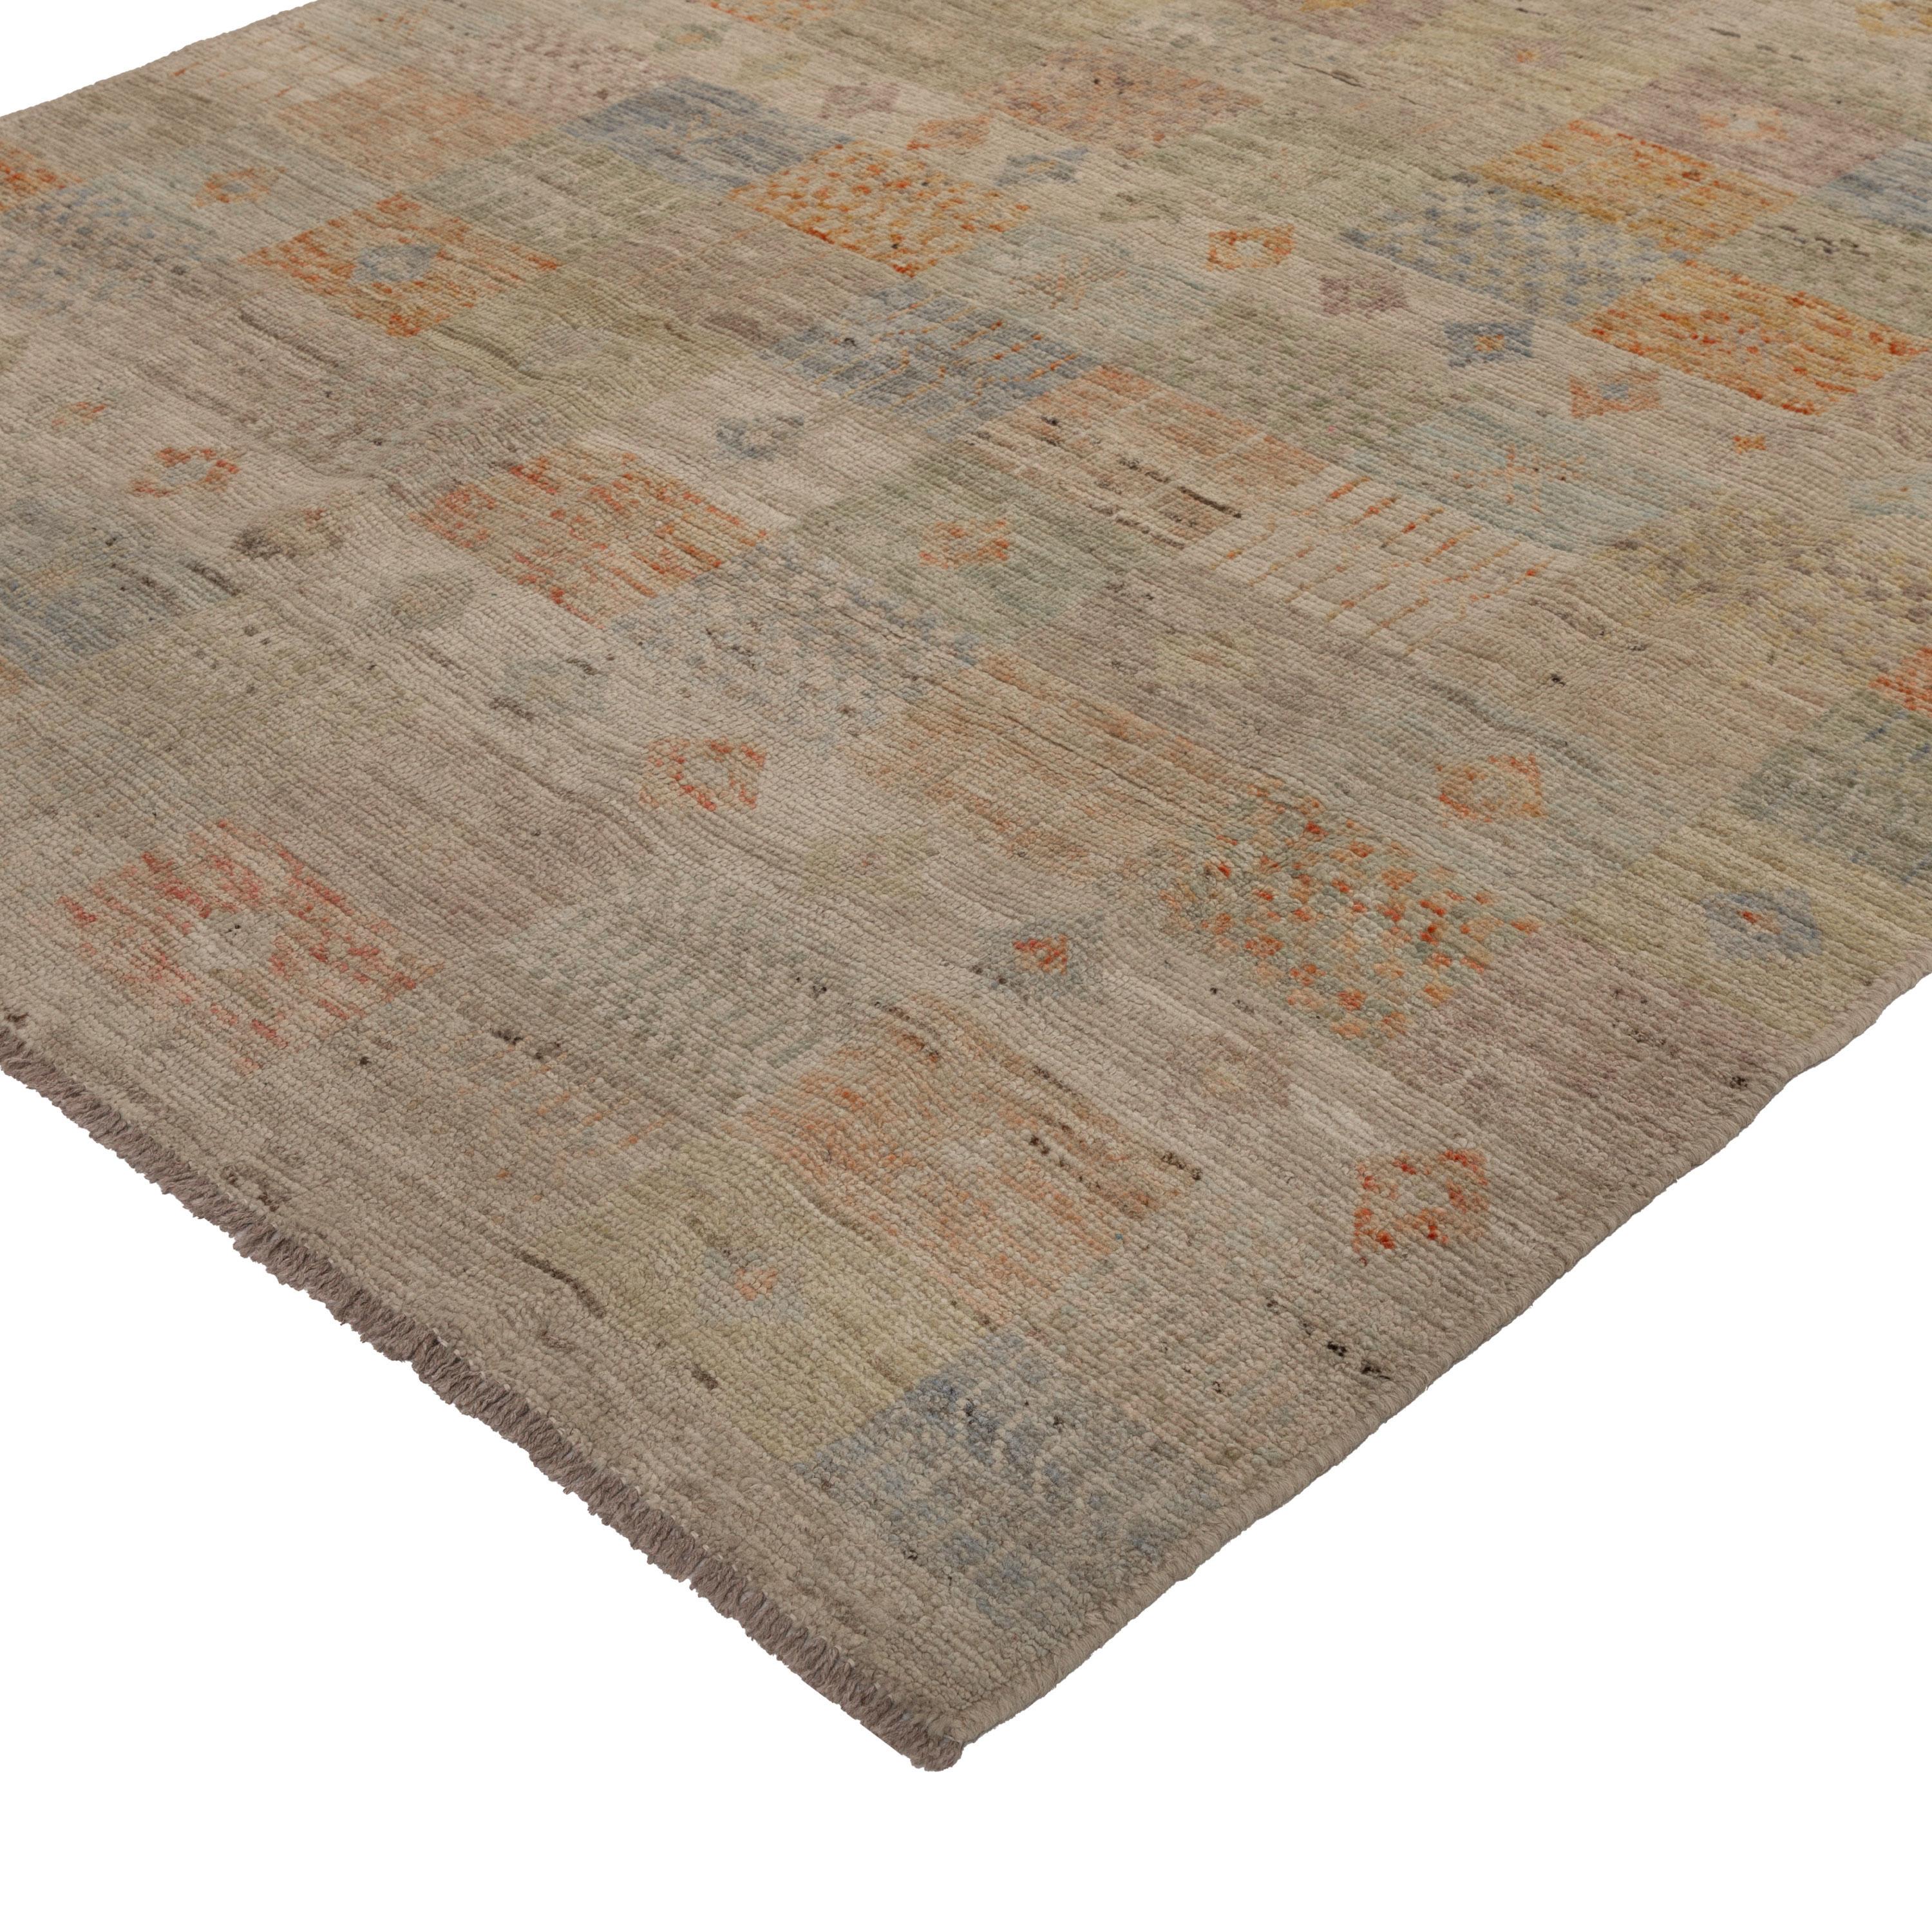 Inspired by the grounding foundations of Earth's natural colors and pure materials, this multi-colored wool rug from abc carpet's Zameen collection, features a variety of geometric designs that are inspired by symbols of history's past.

The